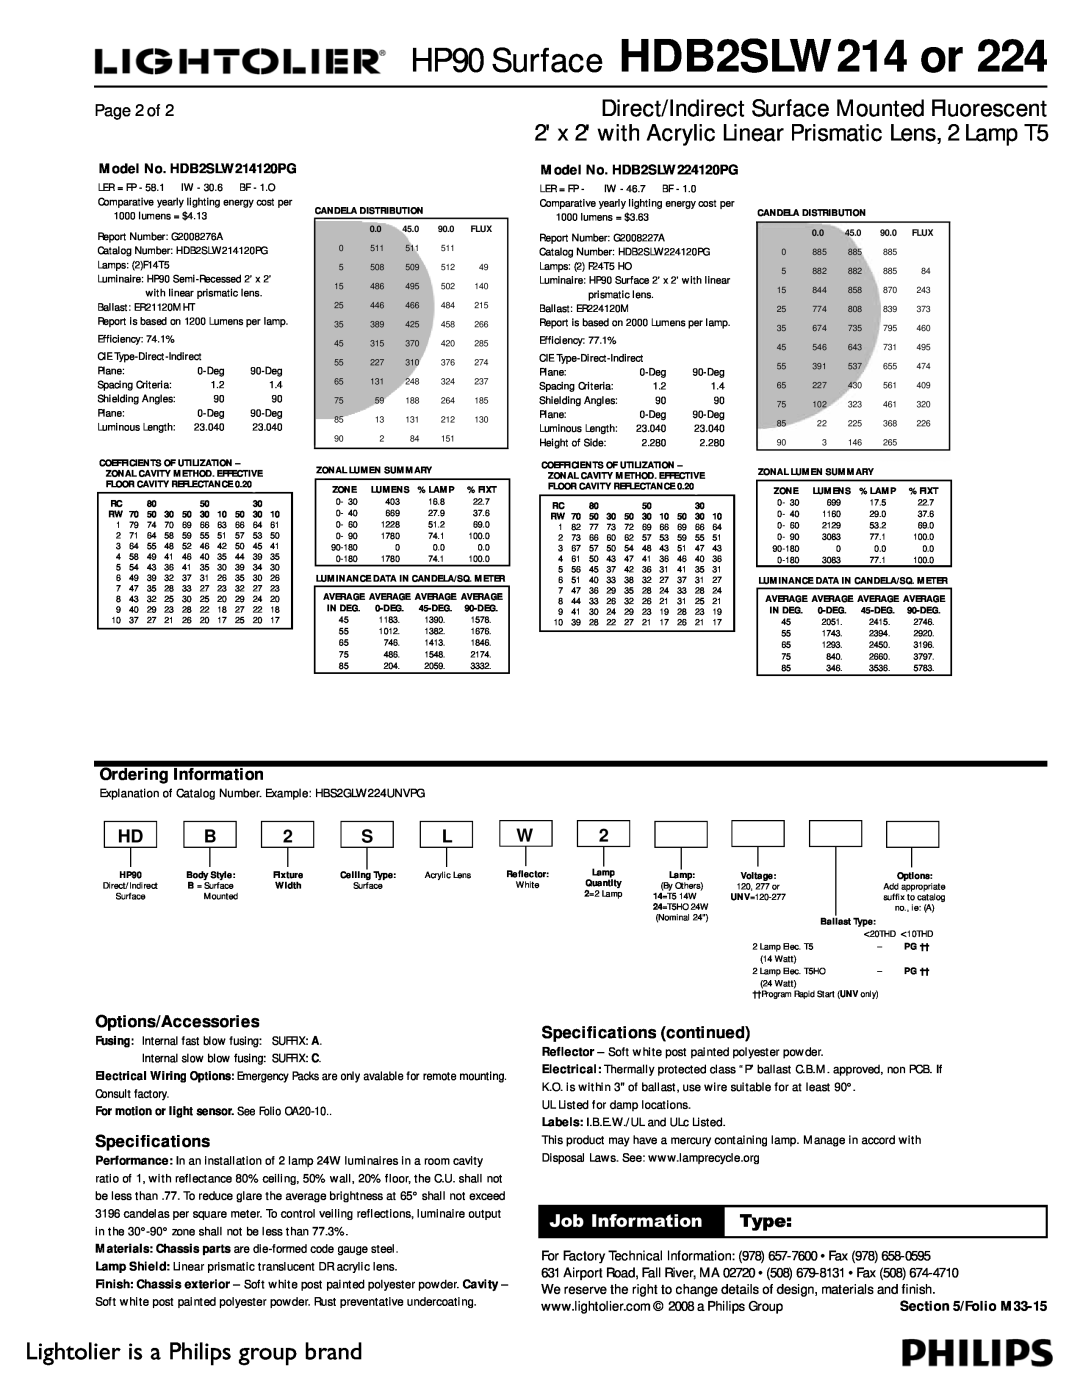 Lightolier HDB2SLW214, HDB2SLW224 Ordering Information, Options/Accessories, Specifications continued, Page 2 of 